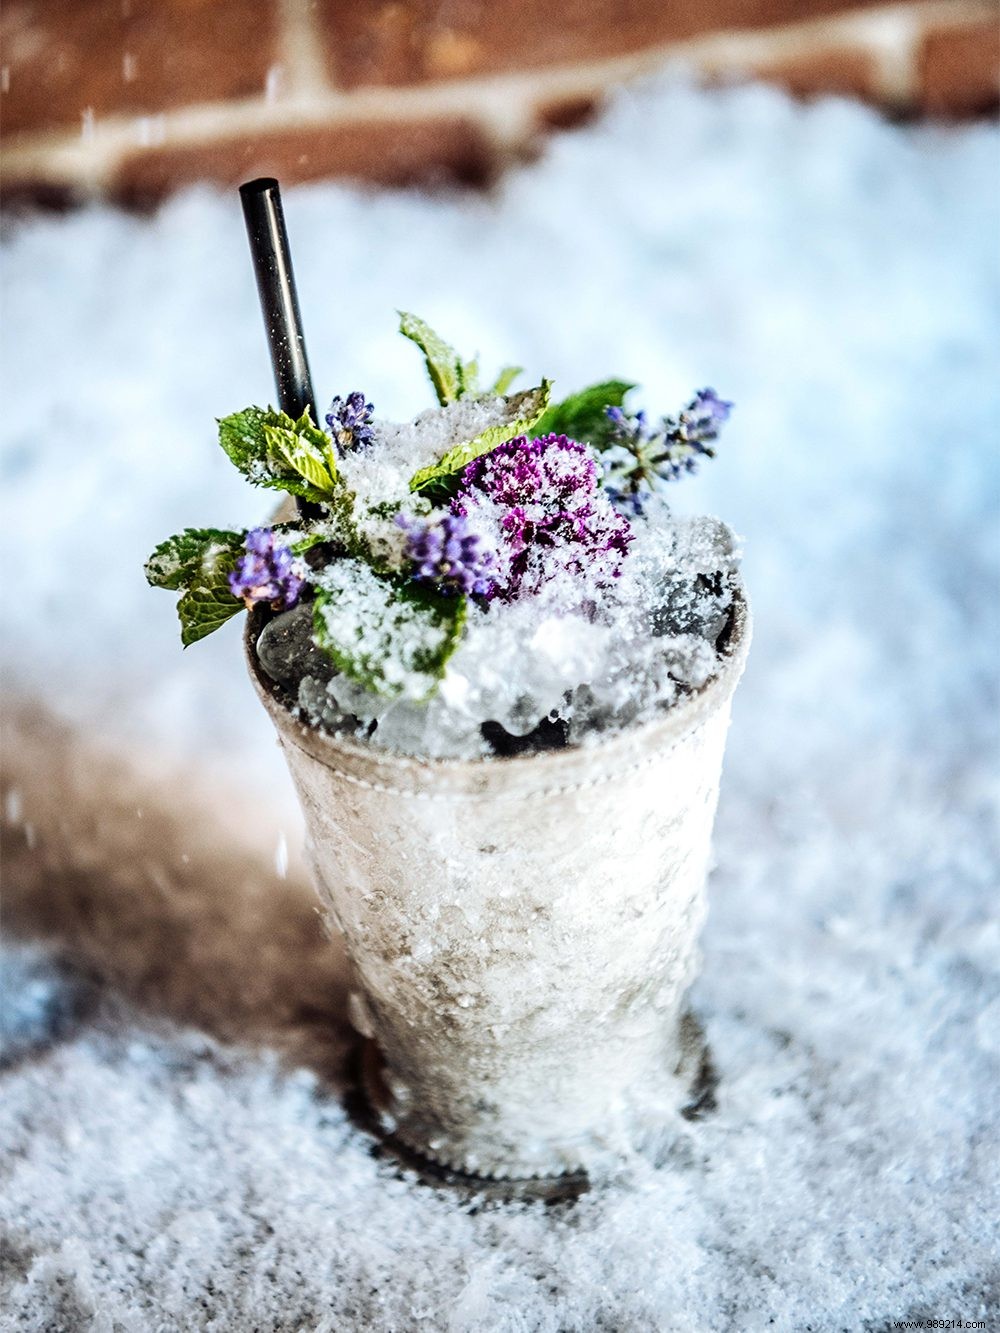 Recipe for a winter cocktail 